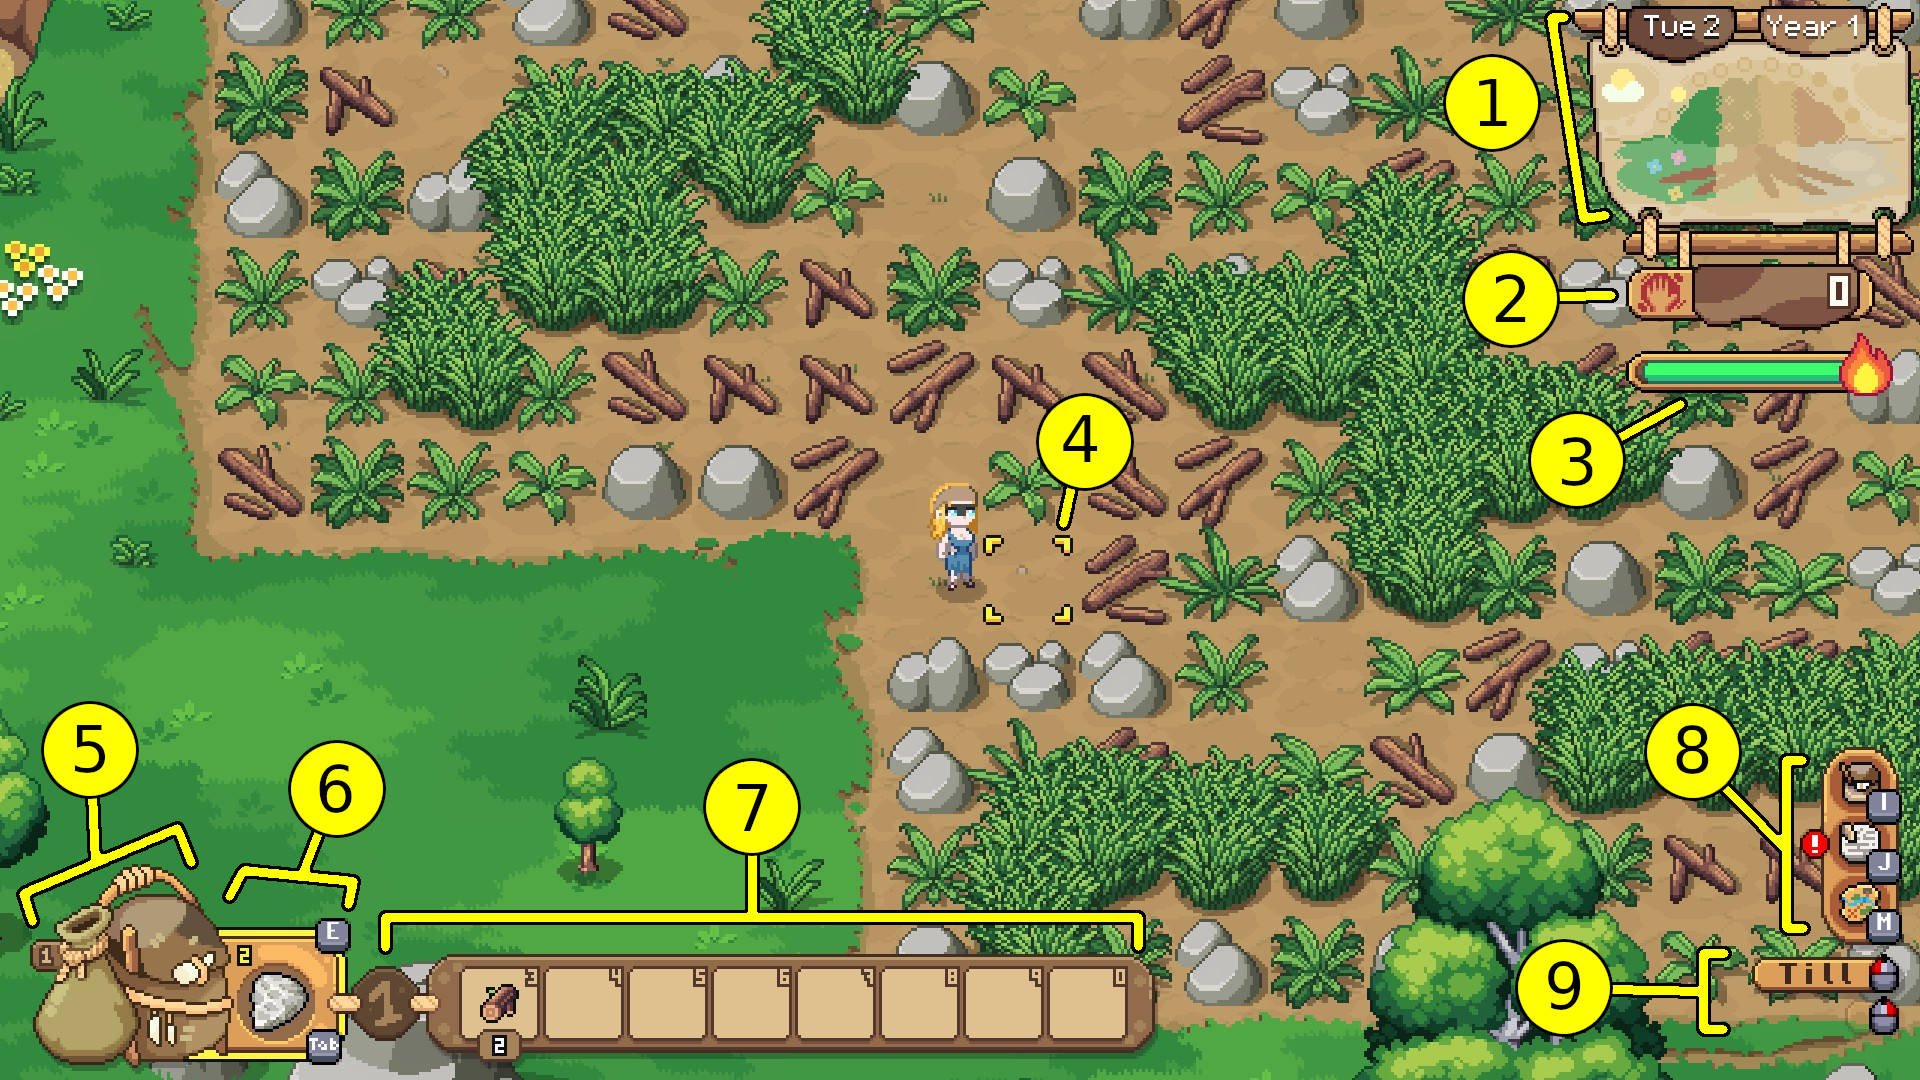 Roots of Pacha Starter Guide - HUD Explanation Player Character Standing in a Field with Numbers Explaining the UI